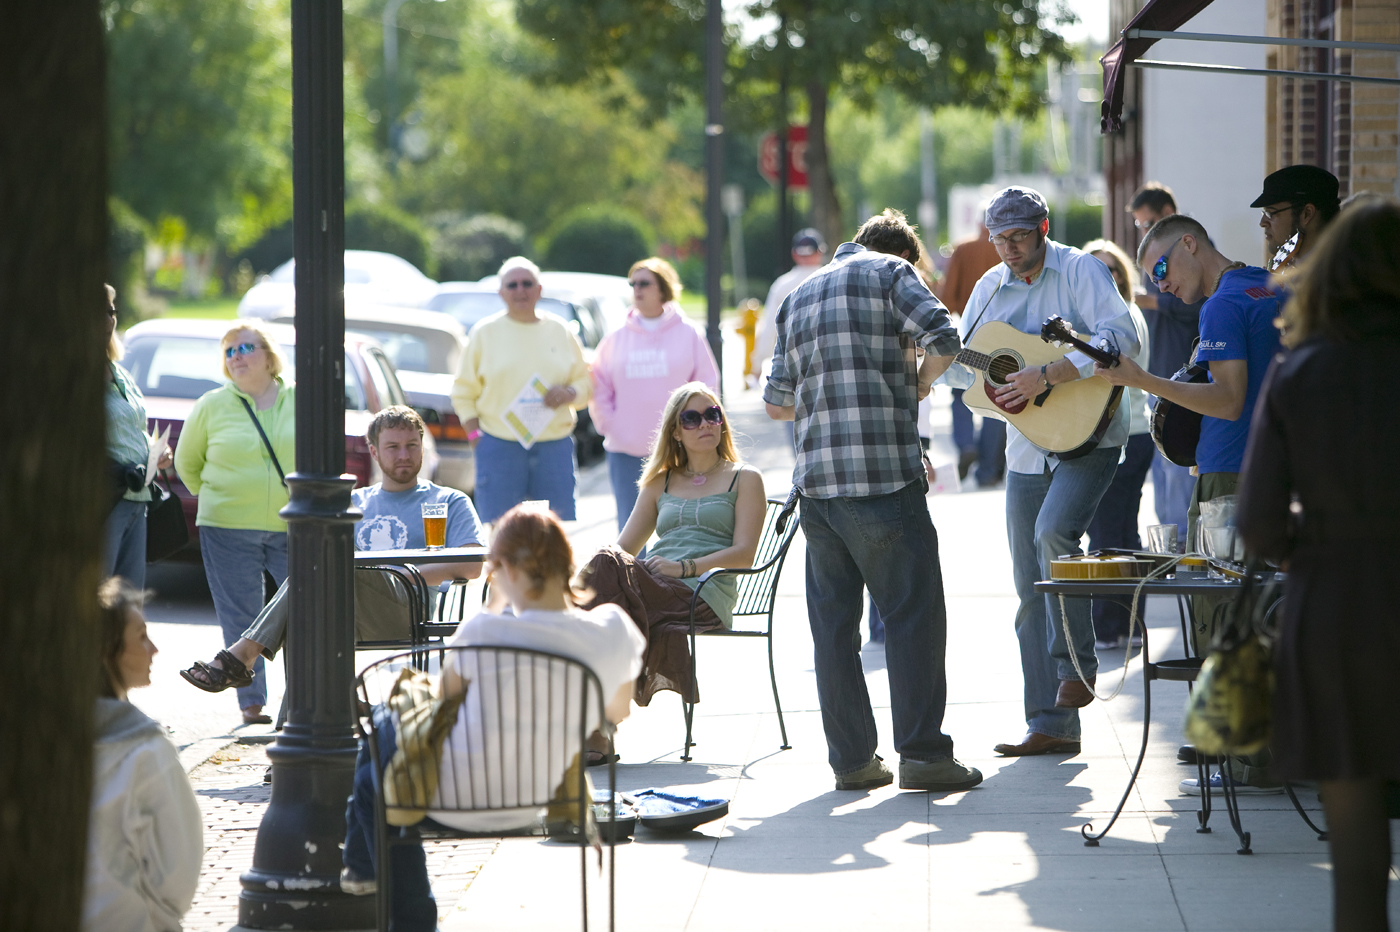 Musicians perform on a sidewalk in Grand Forks as people walk by and sit in chairs.